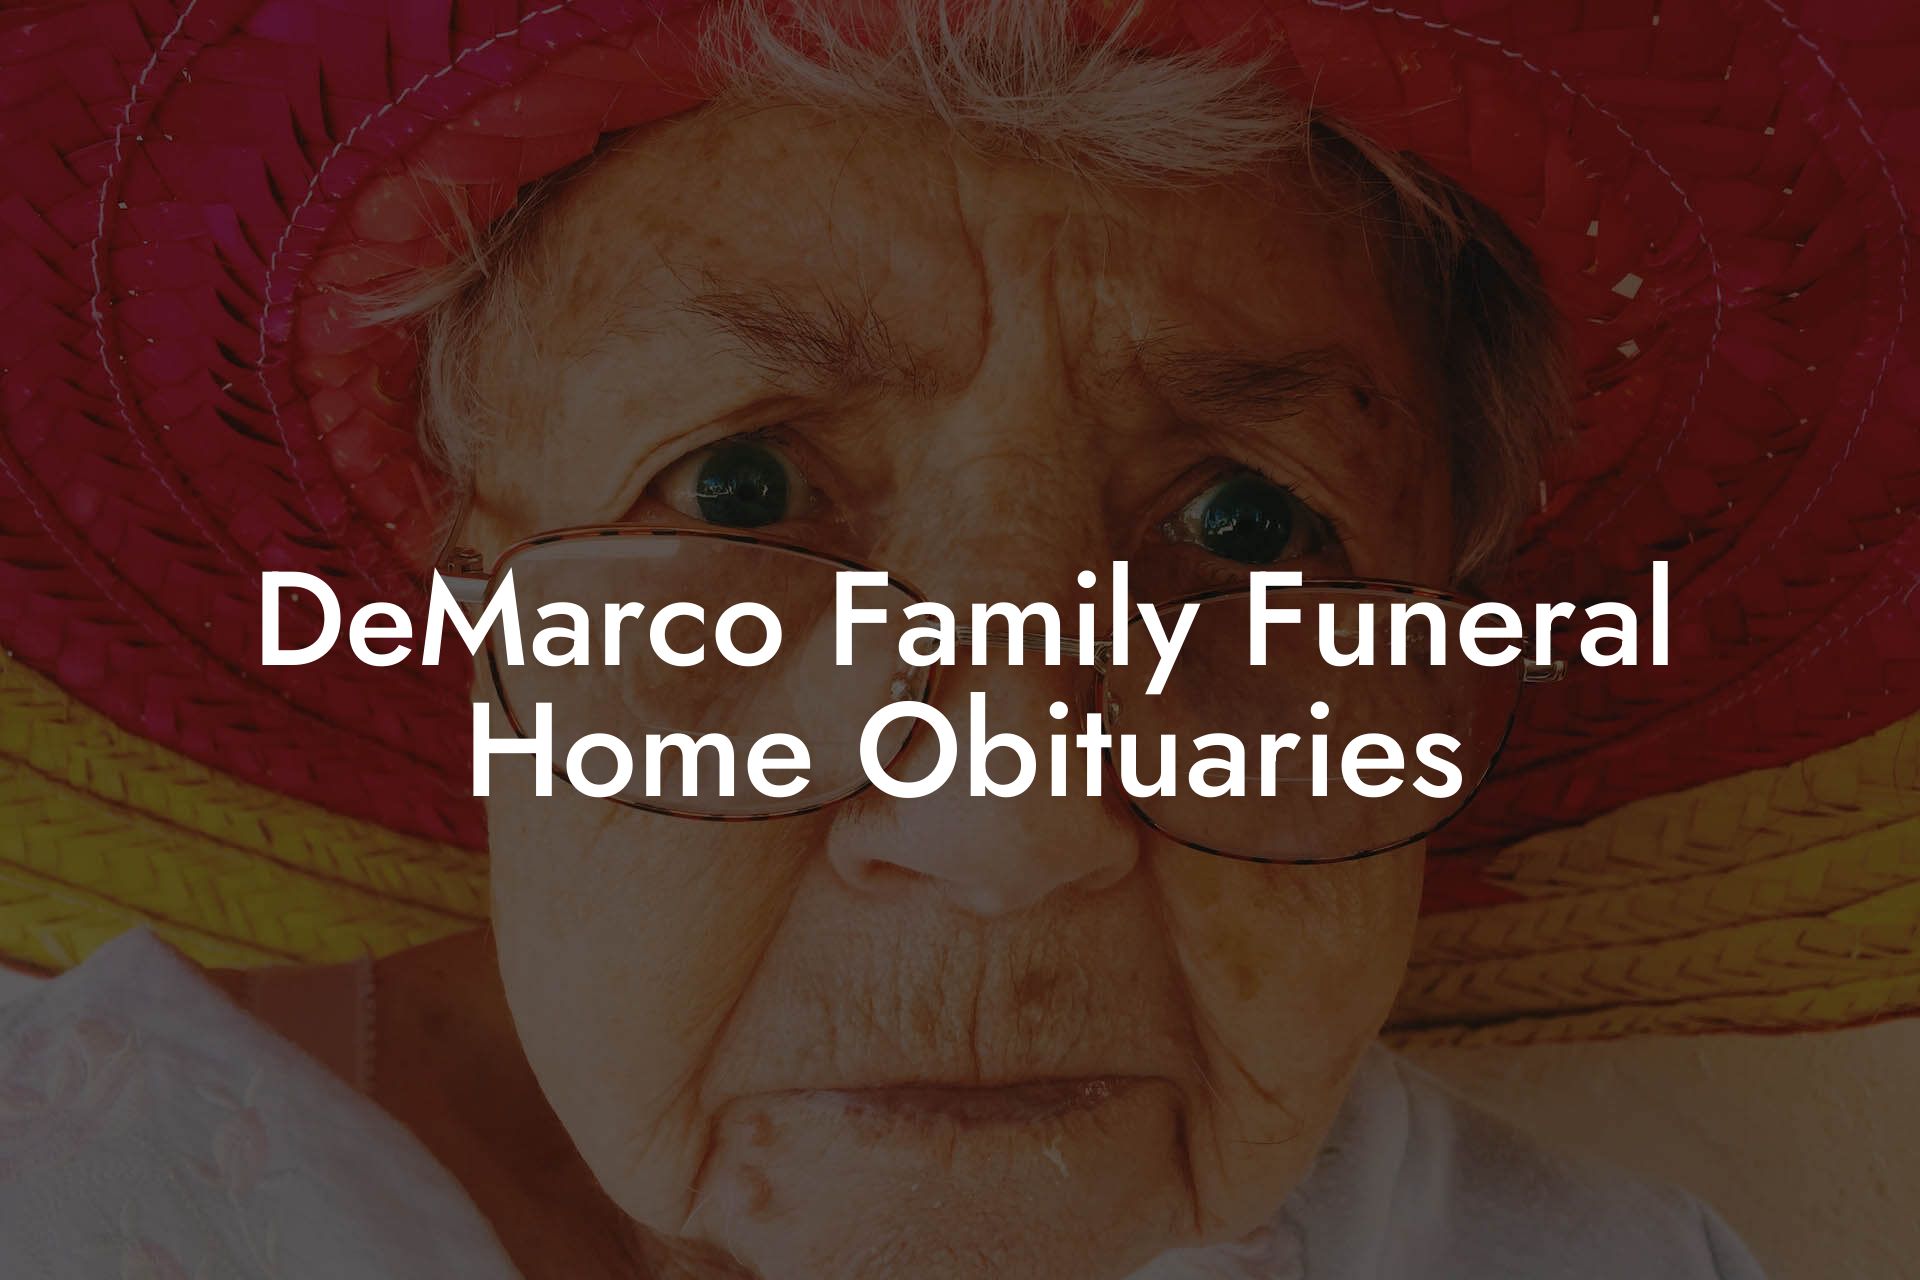 DeMarco Family Funeral Home Obituaries